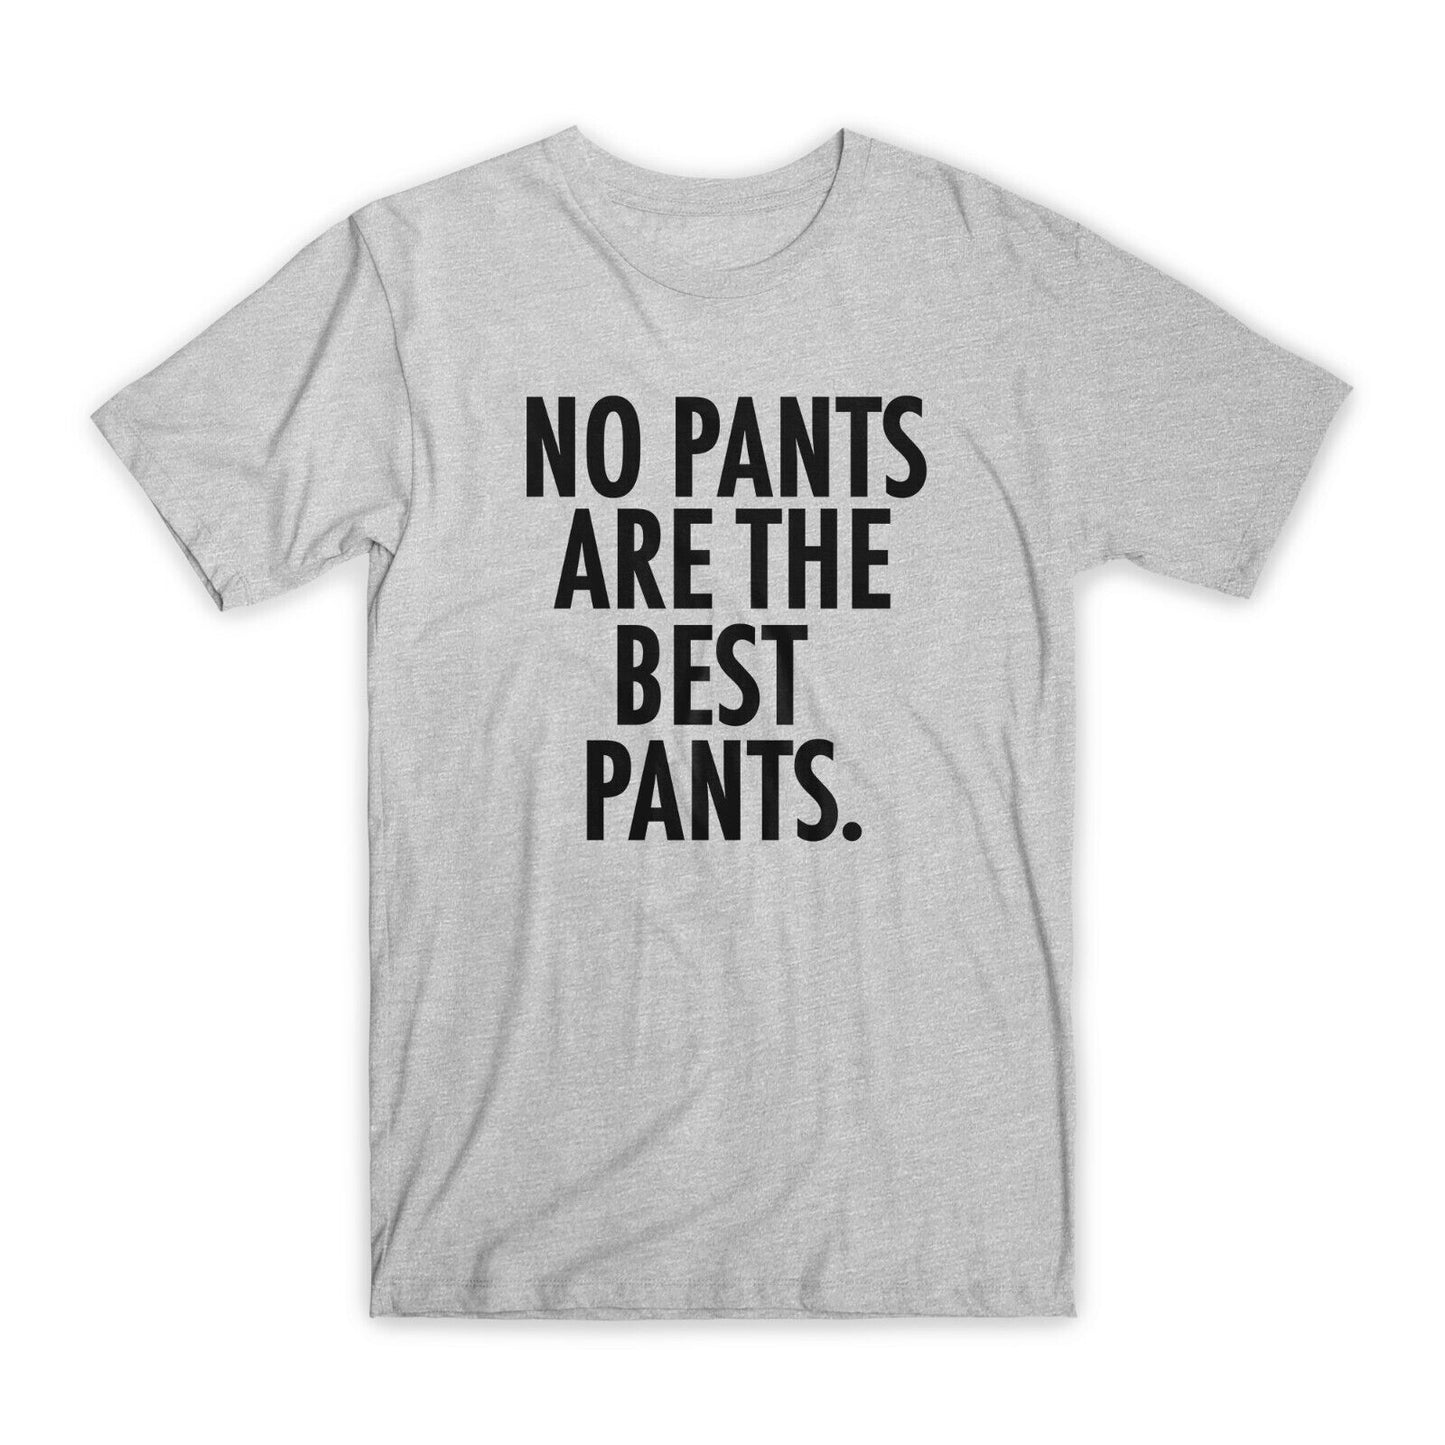 No Pants Are The Best Pants T-Shirt Premium Cotton Crew Neck Funny Tees Gift NEW